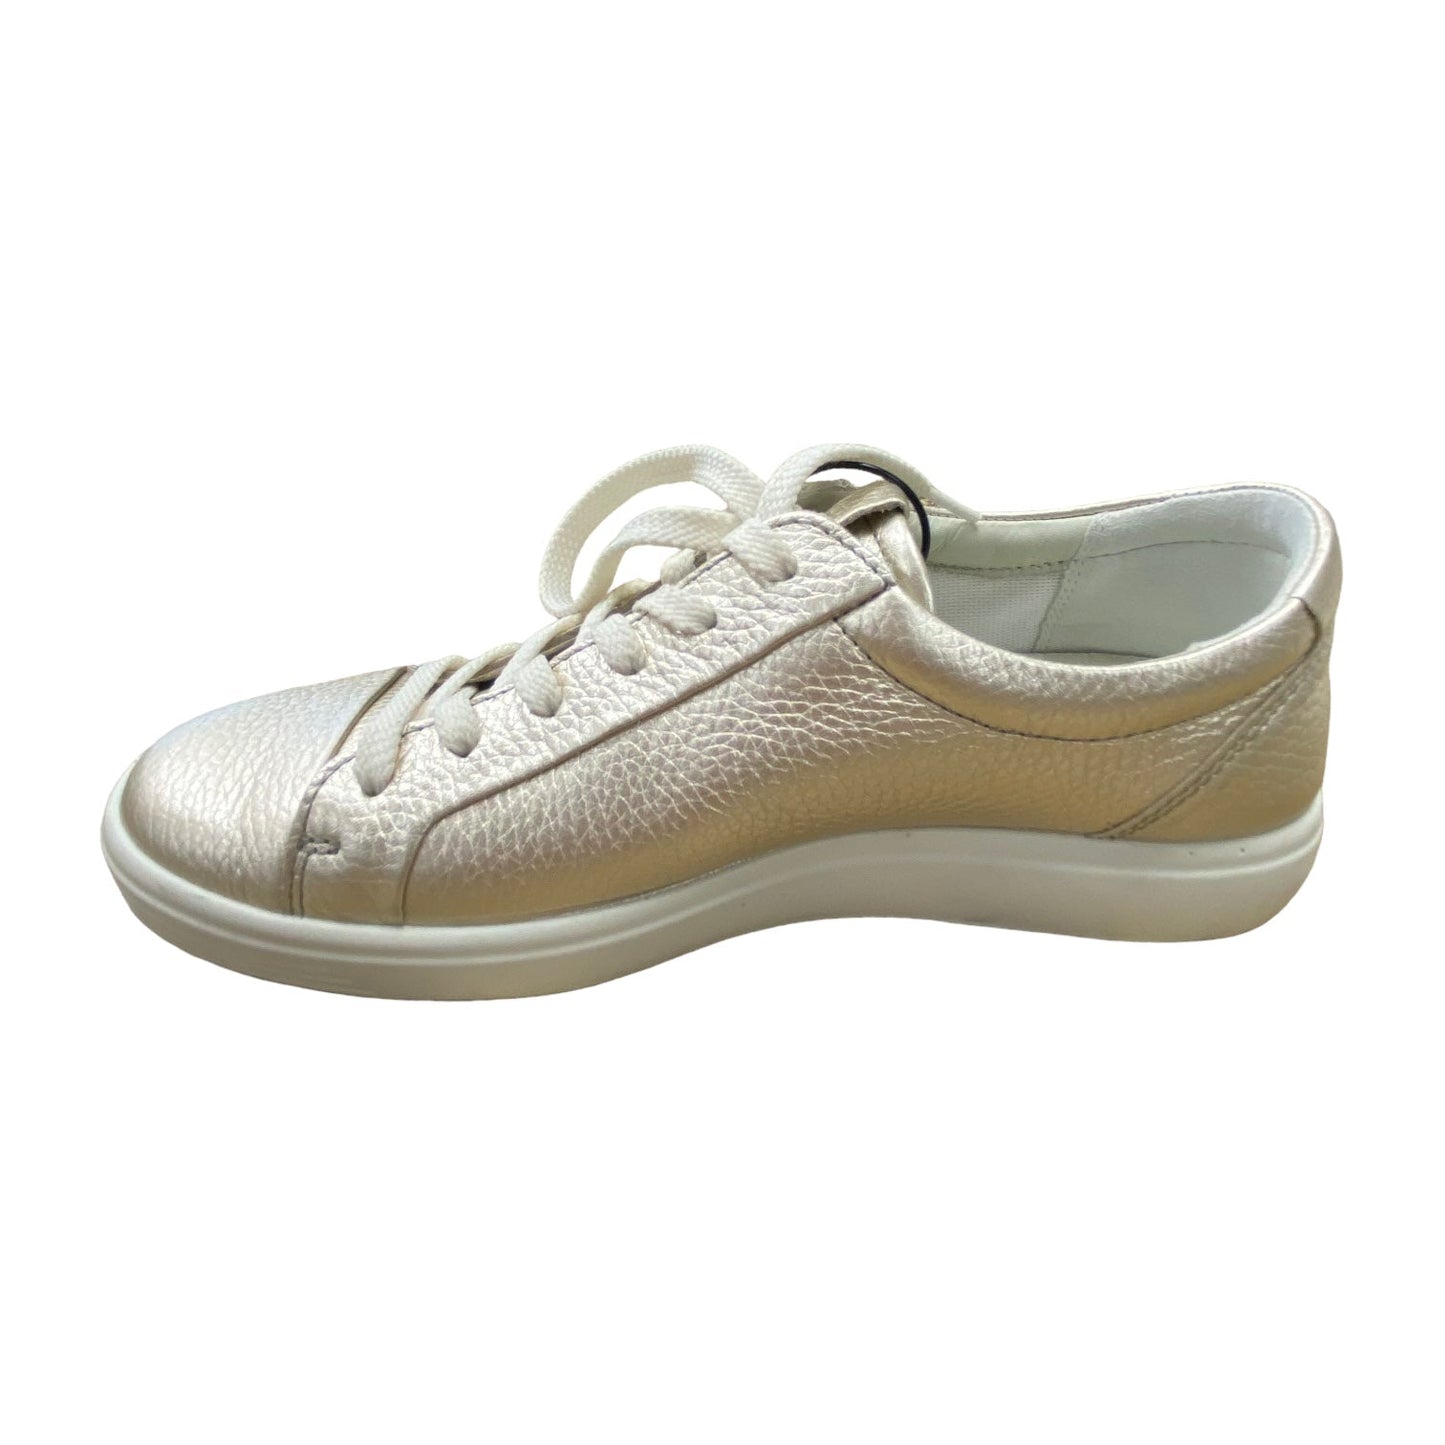 Shoes Athletic By Ecco  Size: 7.5